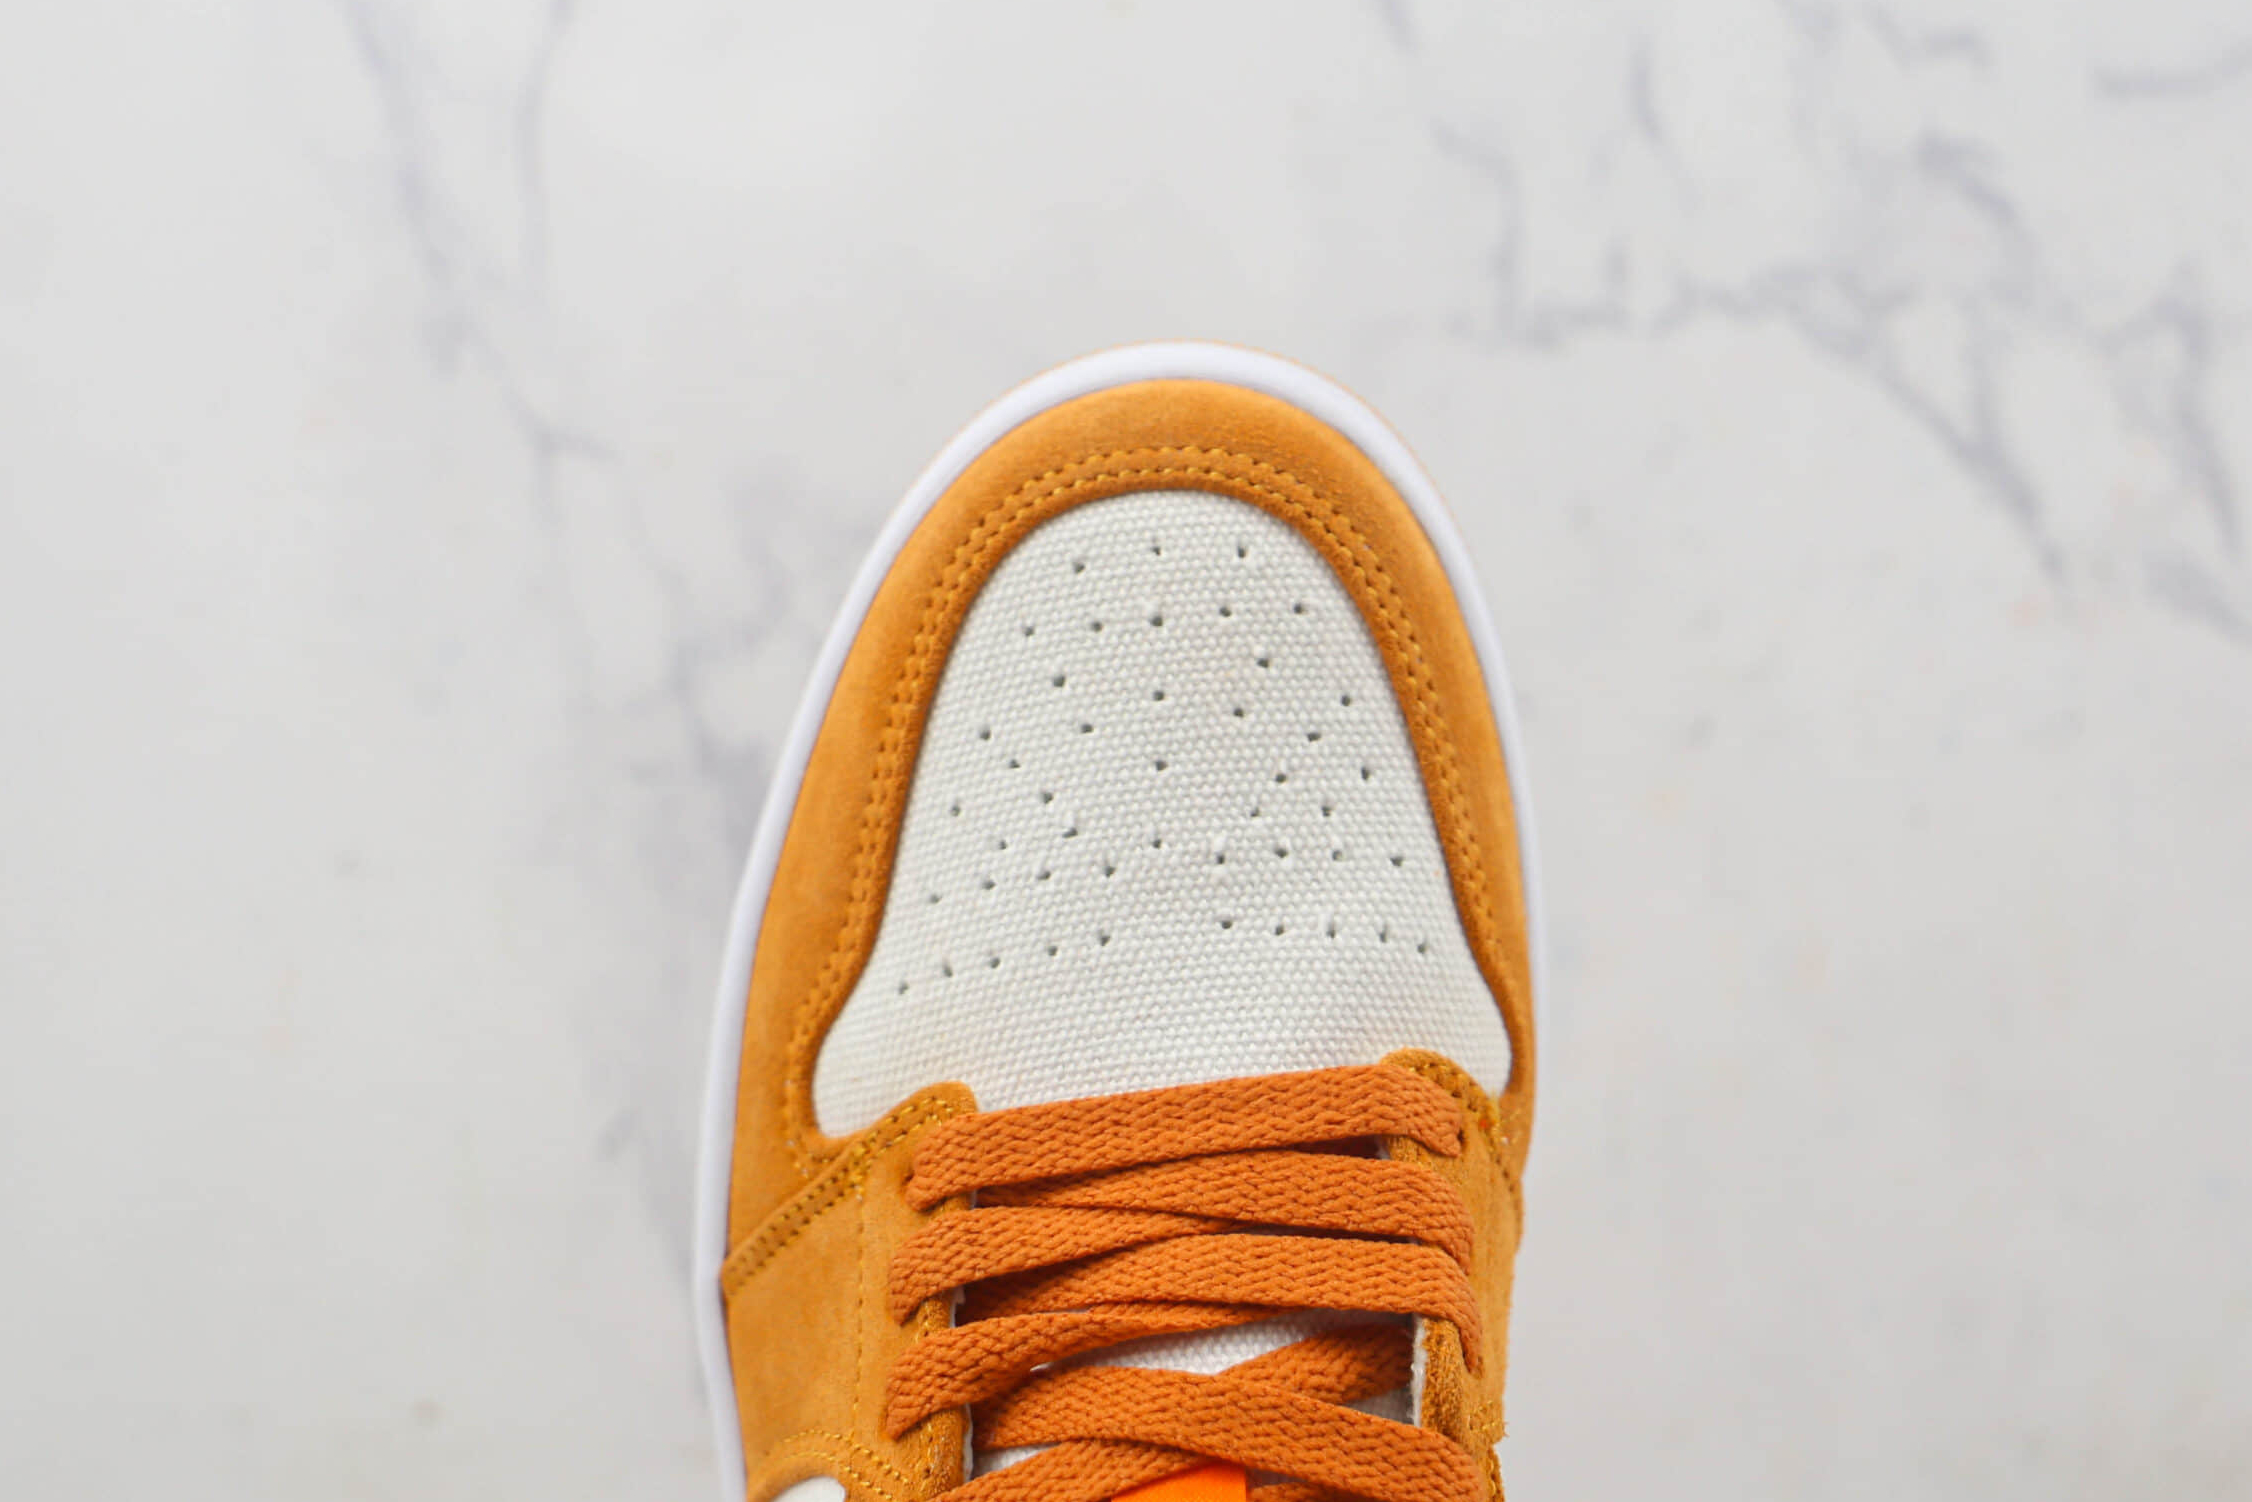 Air Jordan 1 Low SE 'Light Curry' DH6931-102 - Stylish Low-Top Sneakers